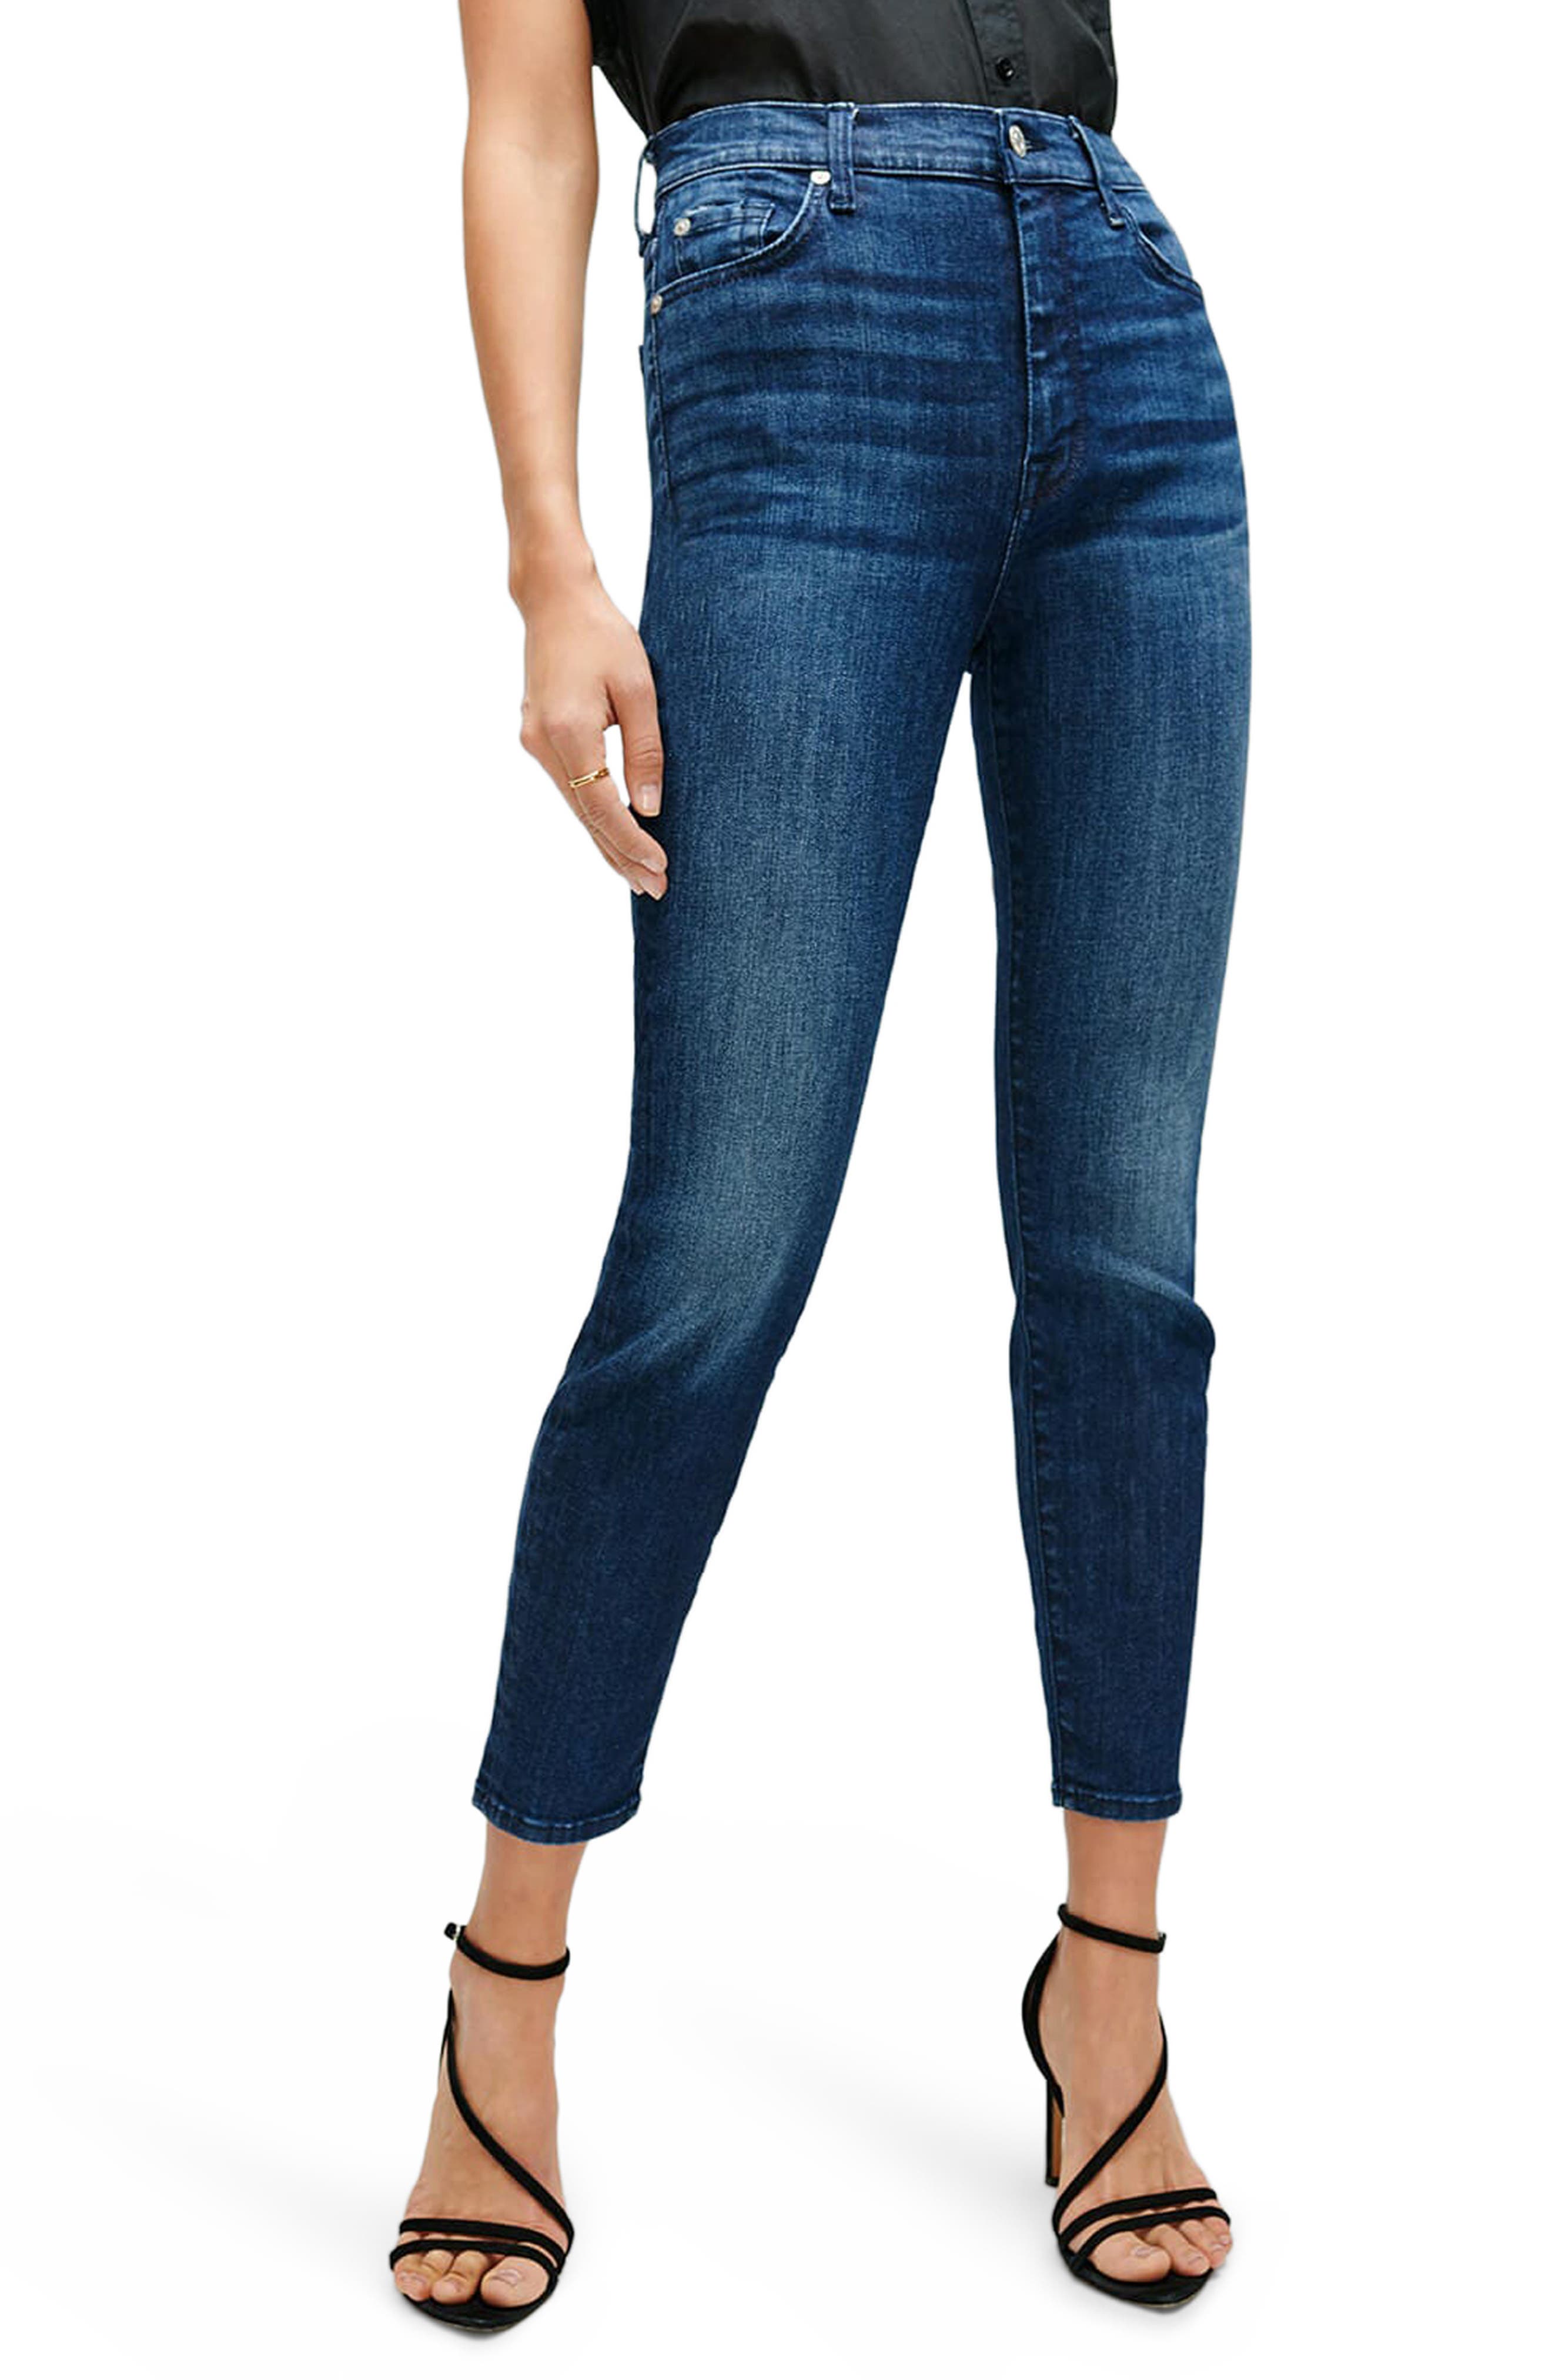 nordstrom 7 for all mankind mens jeans